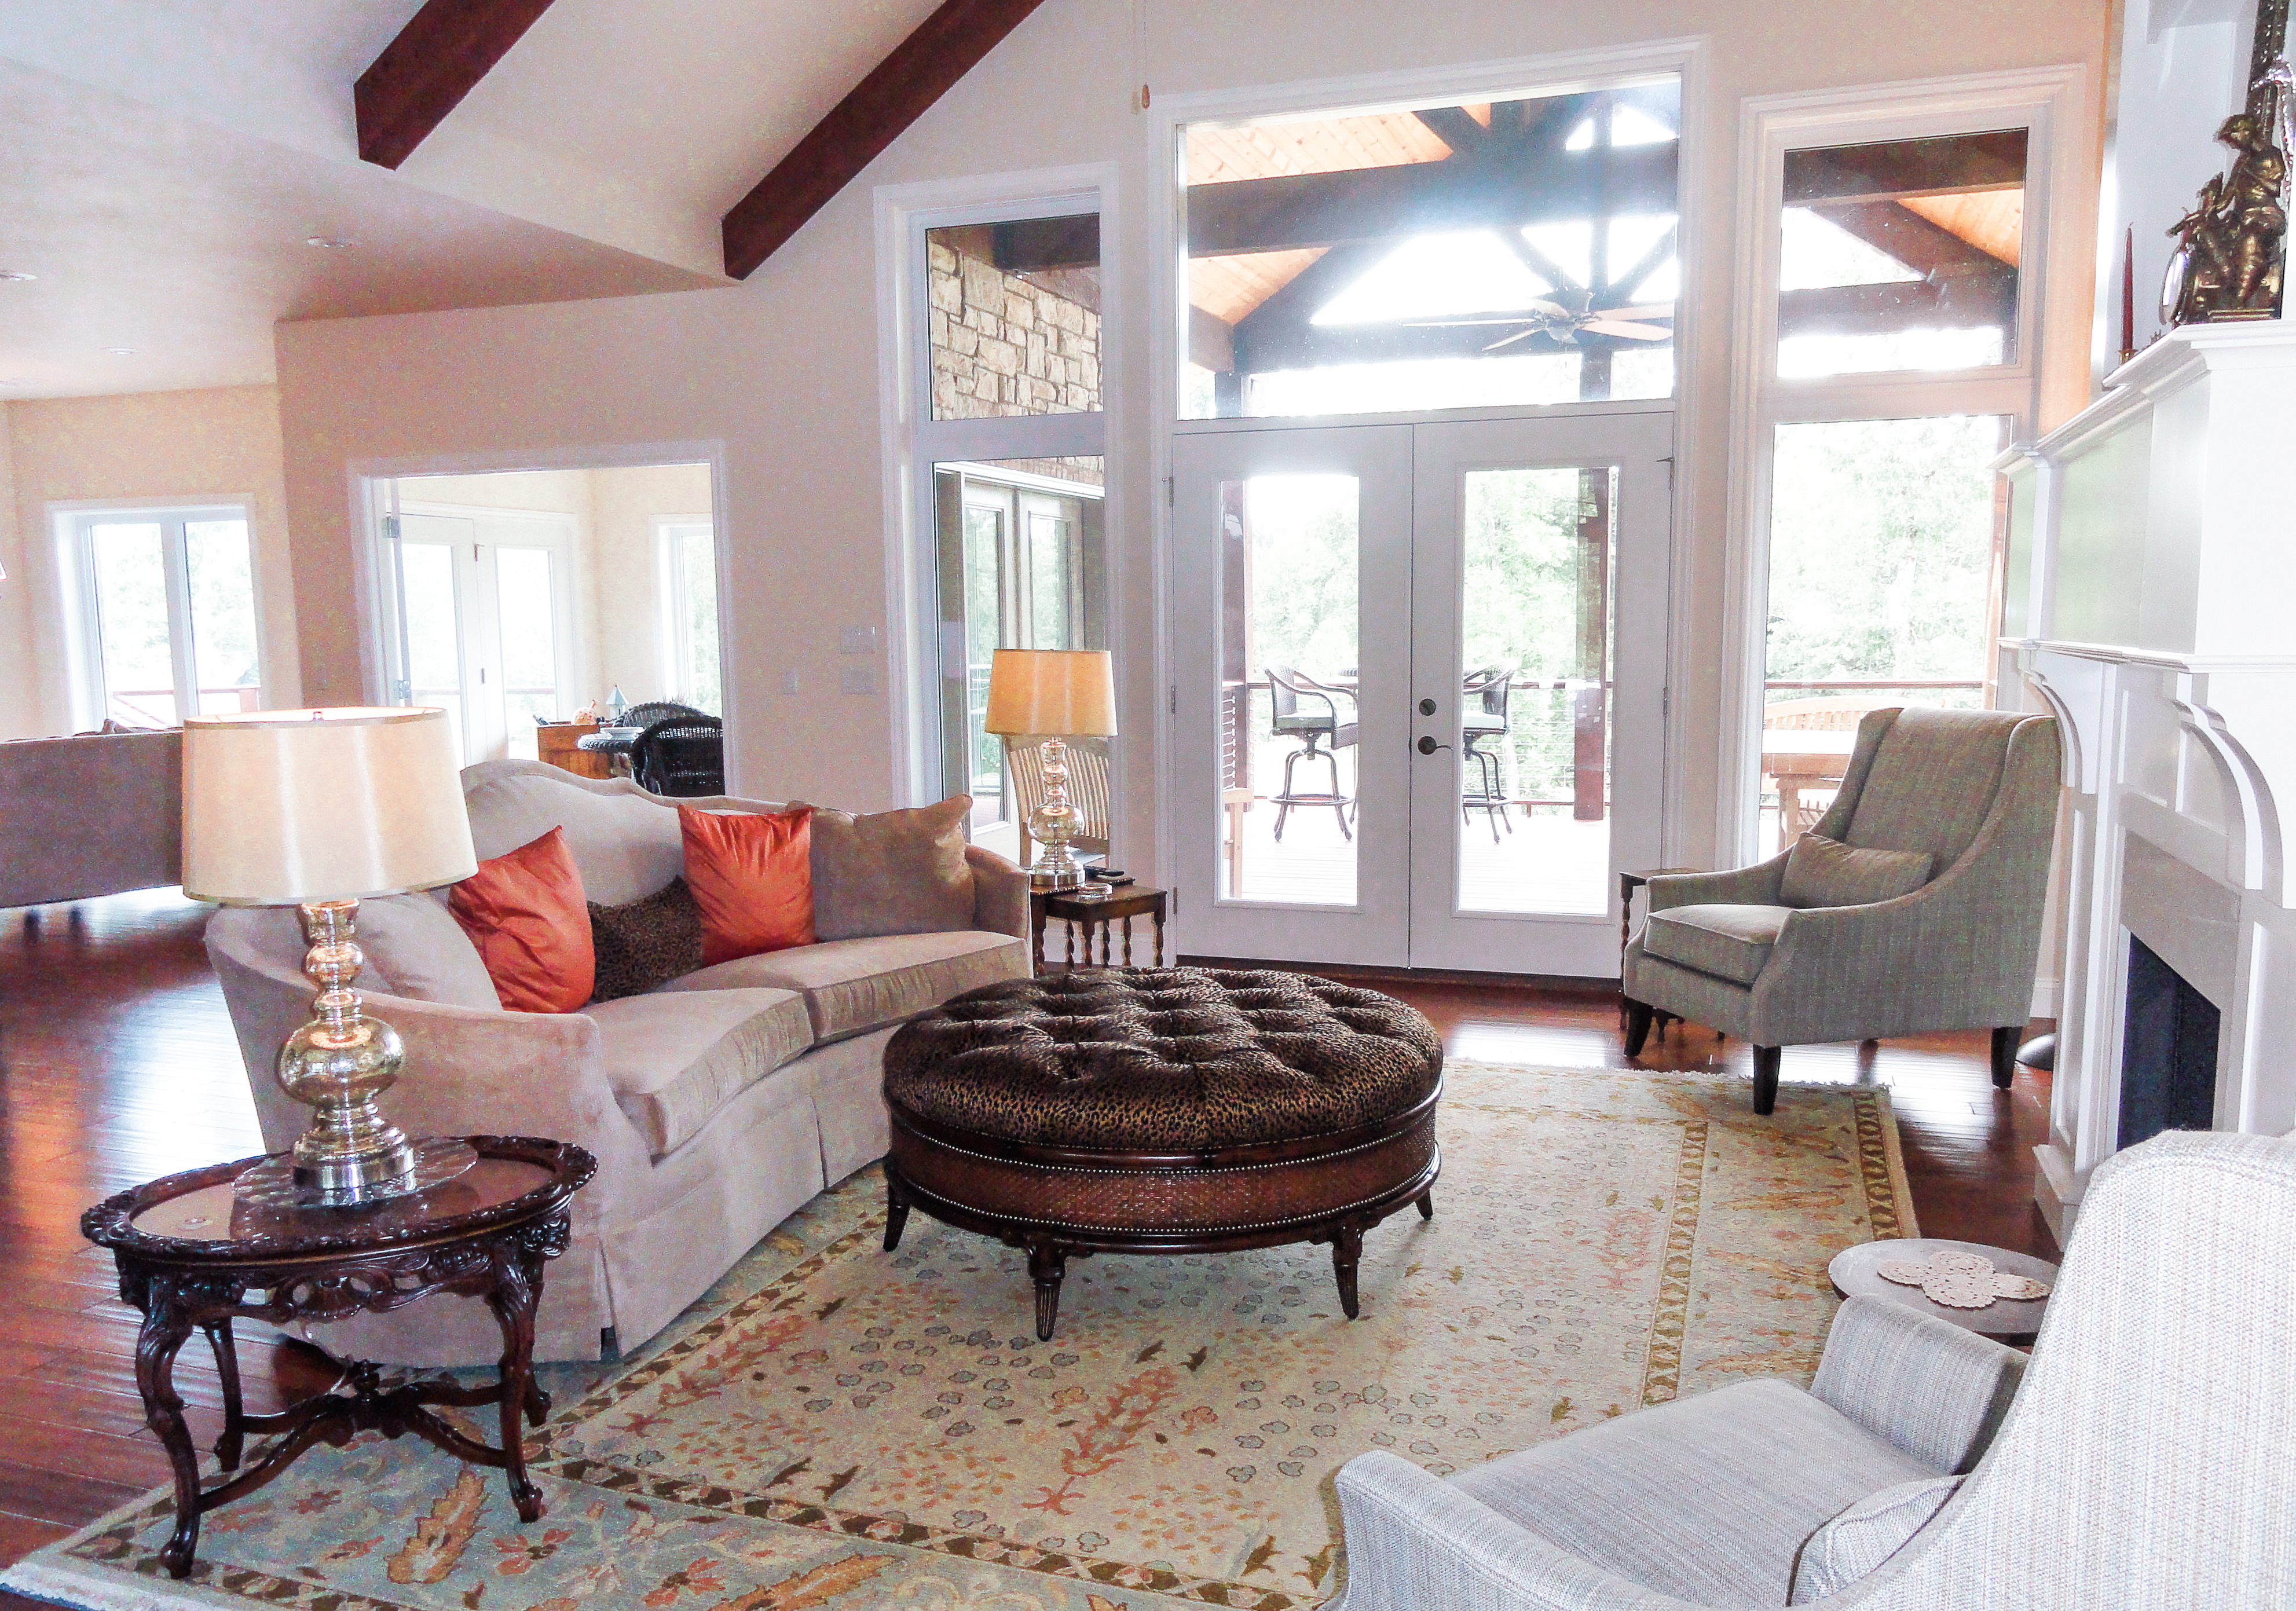 velvet couch, wood beams, white fireplace, wood floors, white mantle, french doors, round tufted ottoman,